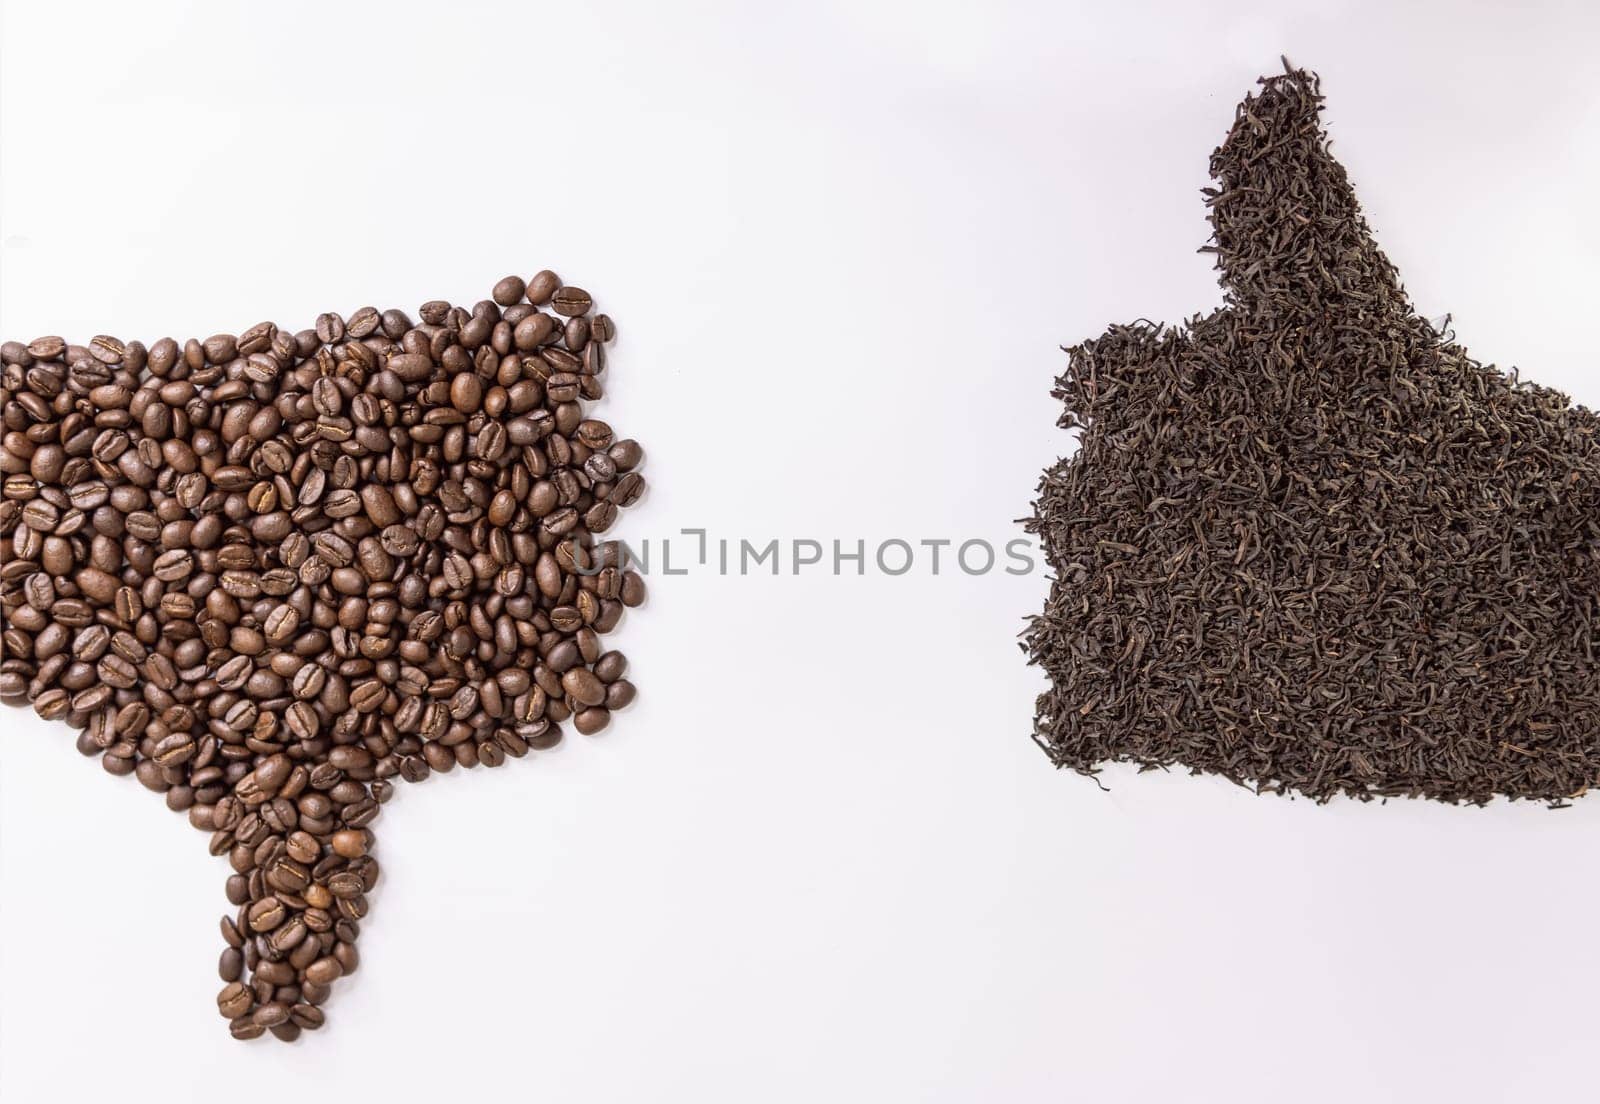 On a white background,human hands are lined with tea leaves and coffee. High quality photo